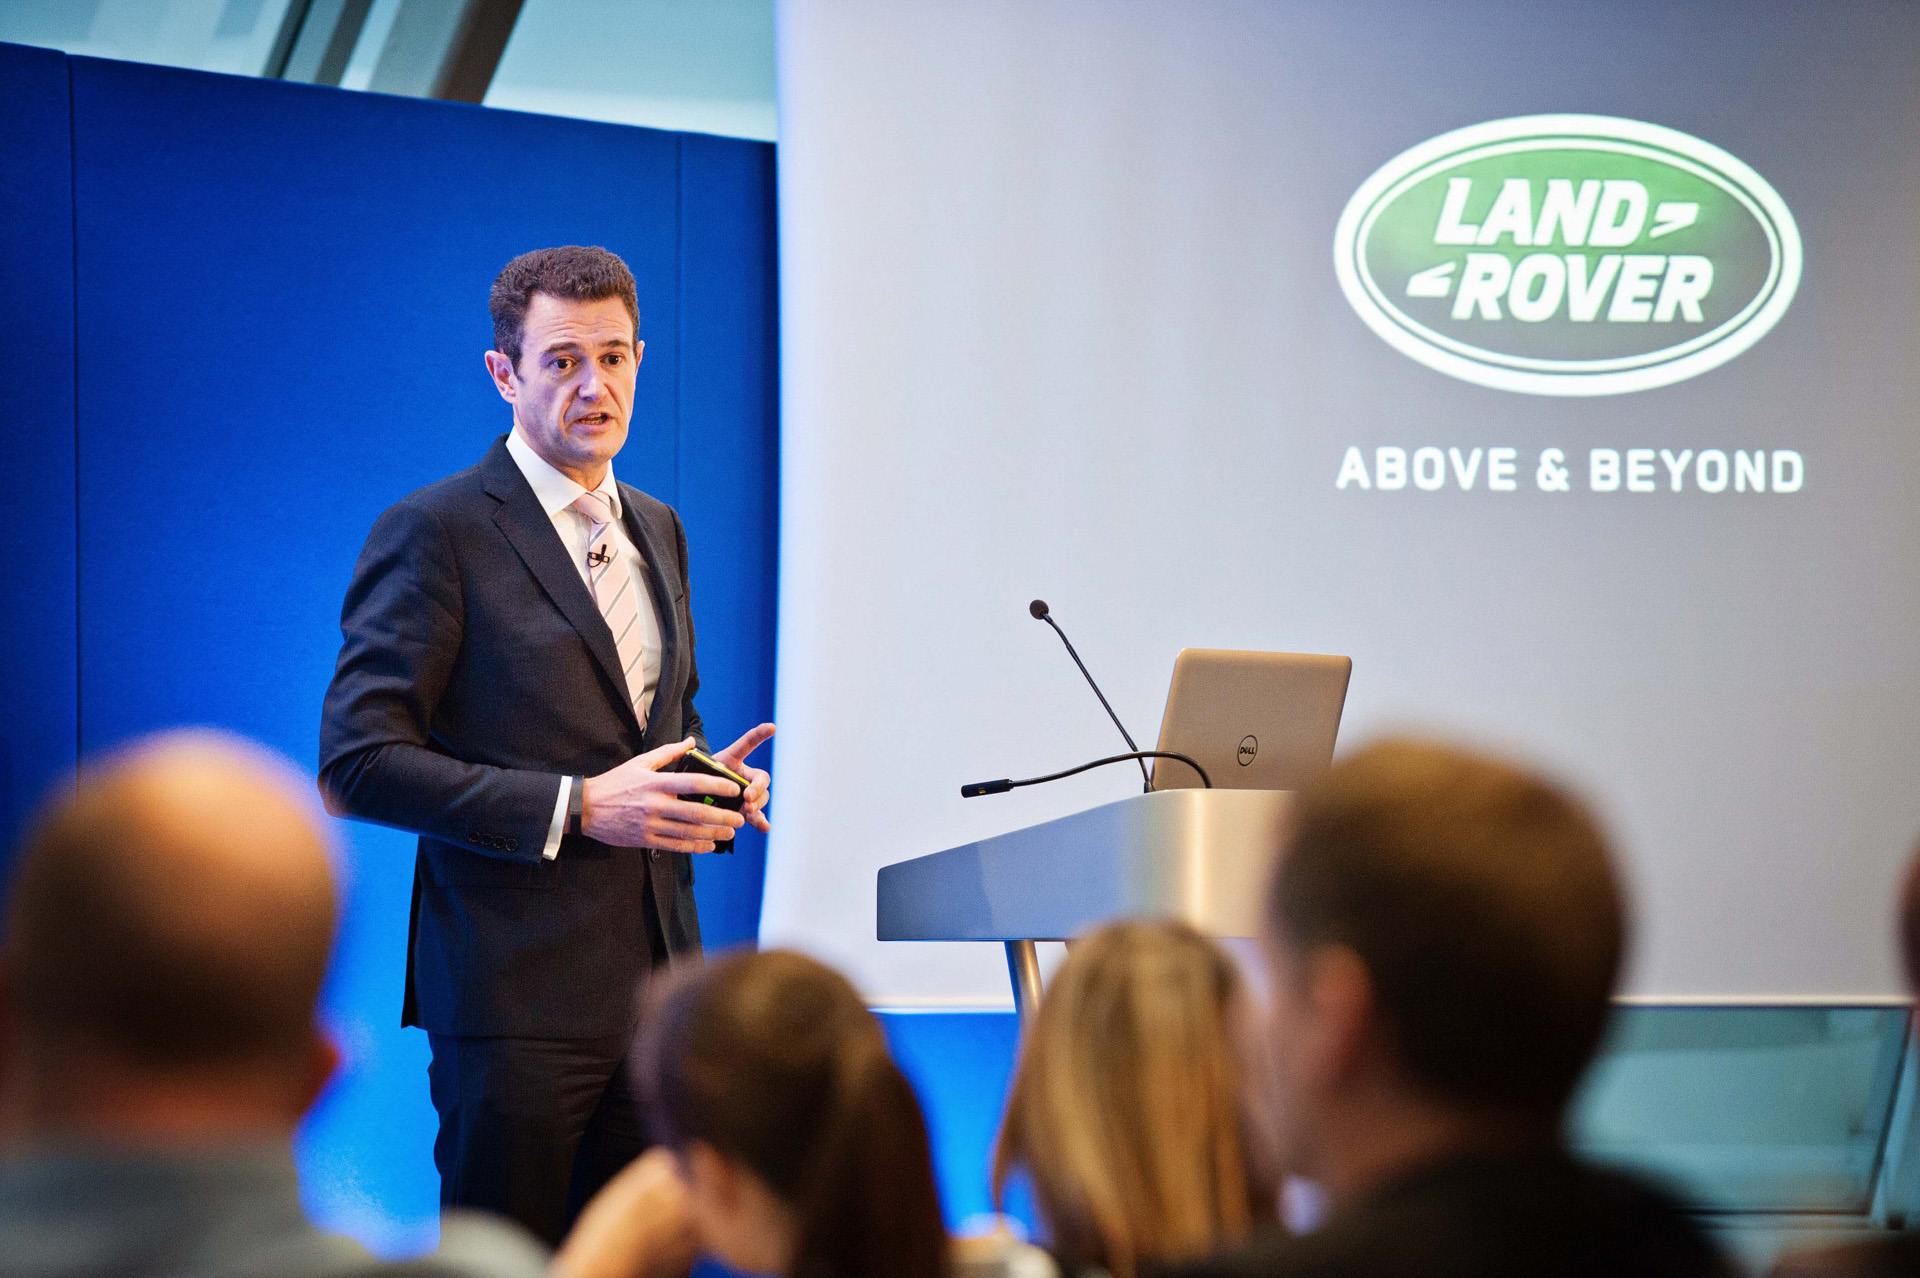 land rover, land rover conference, sky suite, british motor museum, conference photographer, speaker, 